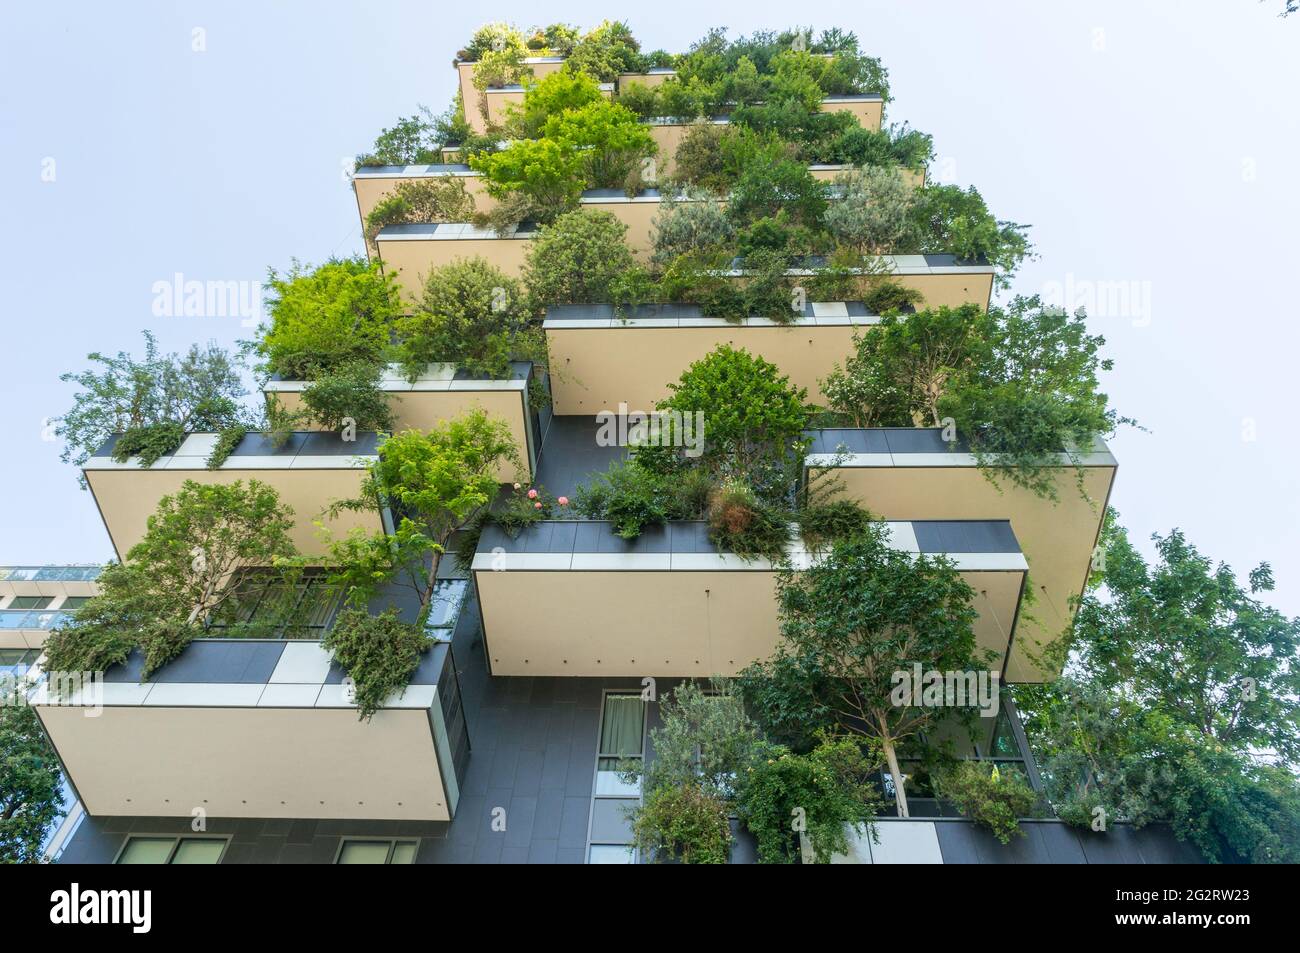 Milan, Italy (6th June 2021) - A view from below of one the s.c. 'vertical forest' building (designed by architect Boeri) near Porta Garibaldi railway Stock Photo